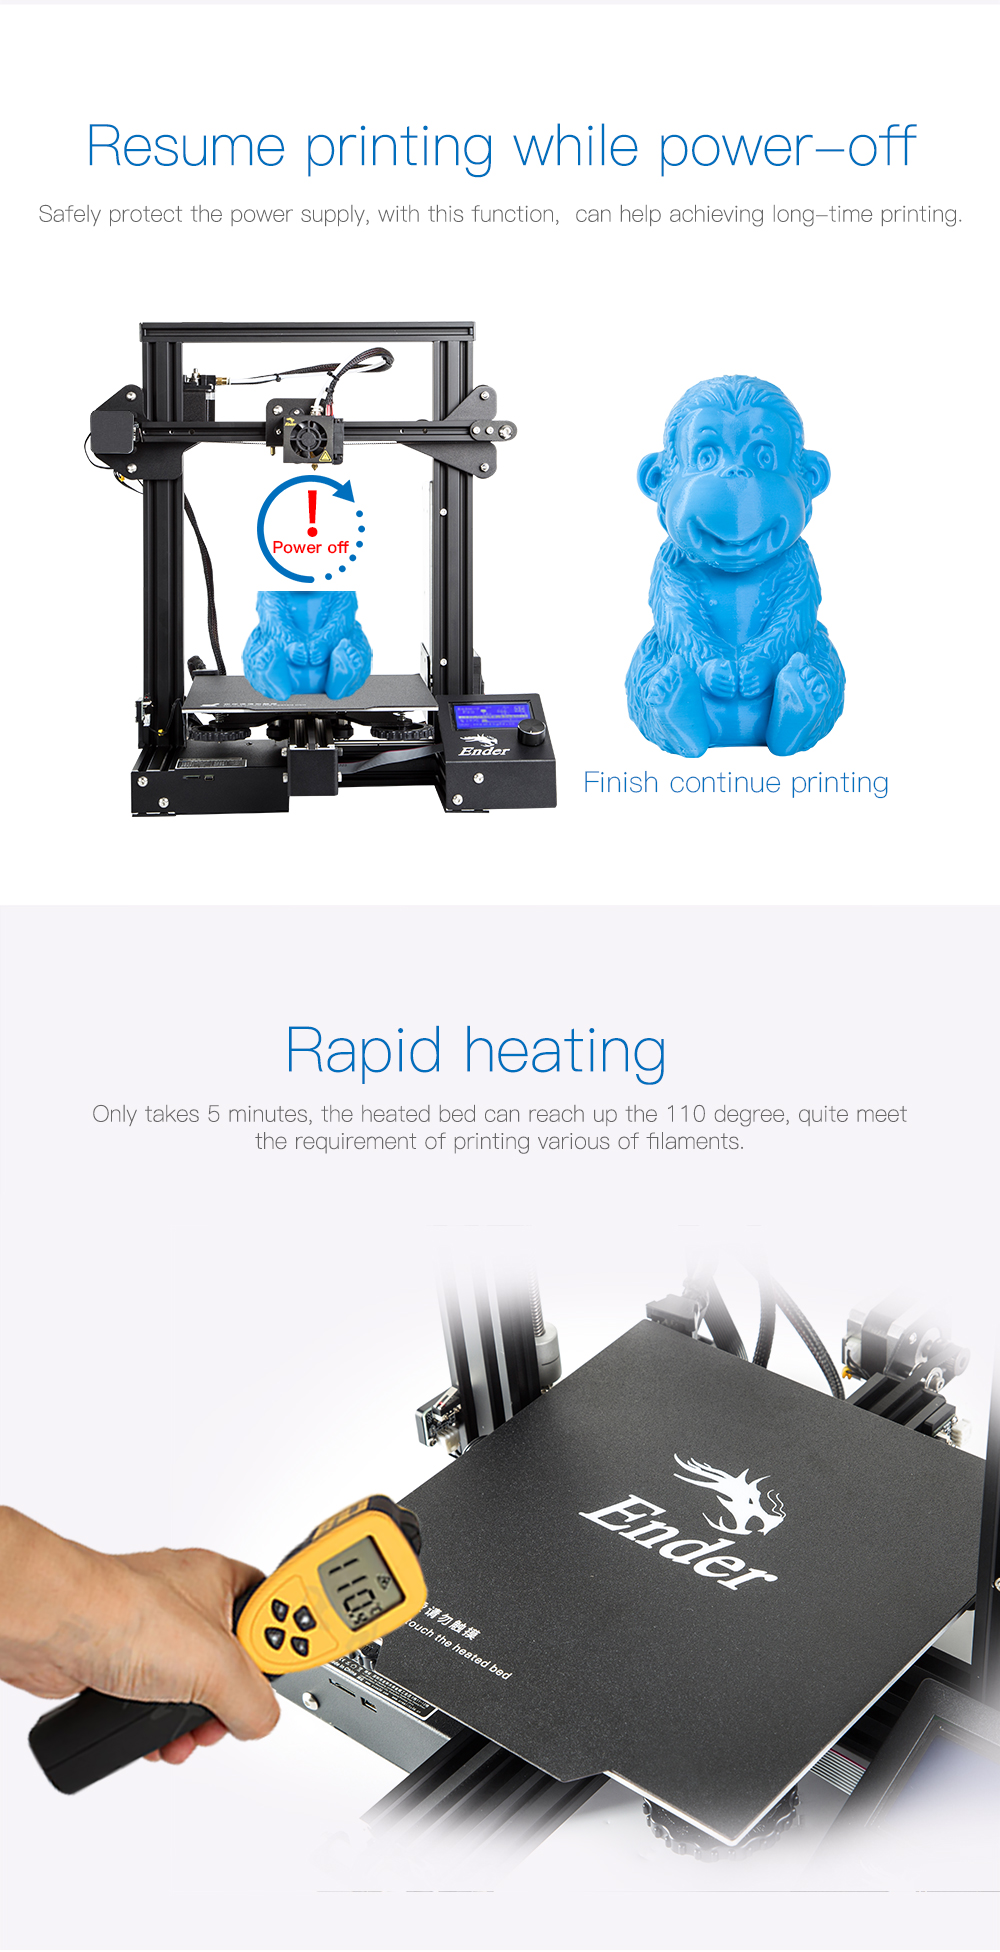 Creality 3D® Ender-3 Pro DIY 3D Printer Kit 220x220x250mm Printing Size With Magnetic Removable Platform Sticker/Power Resume Function/Off-line Print/Patent MK10 Extruder/Simple Leveling